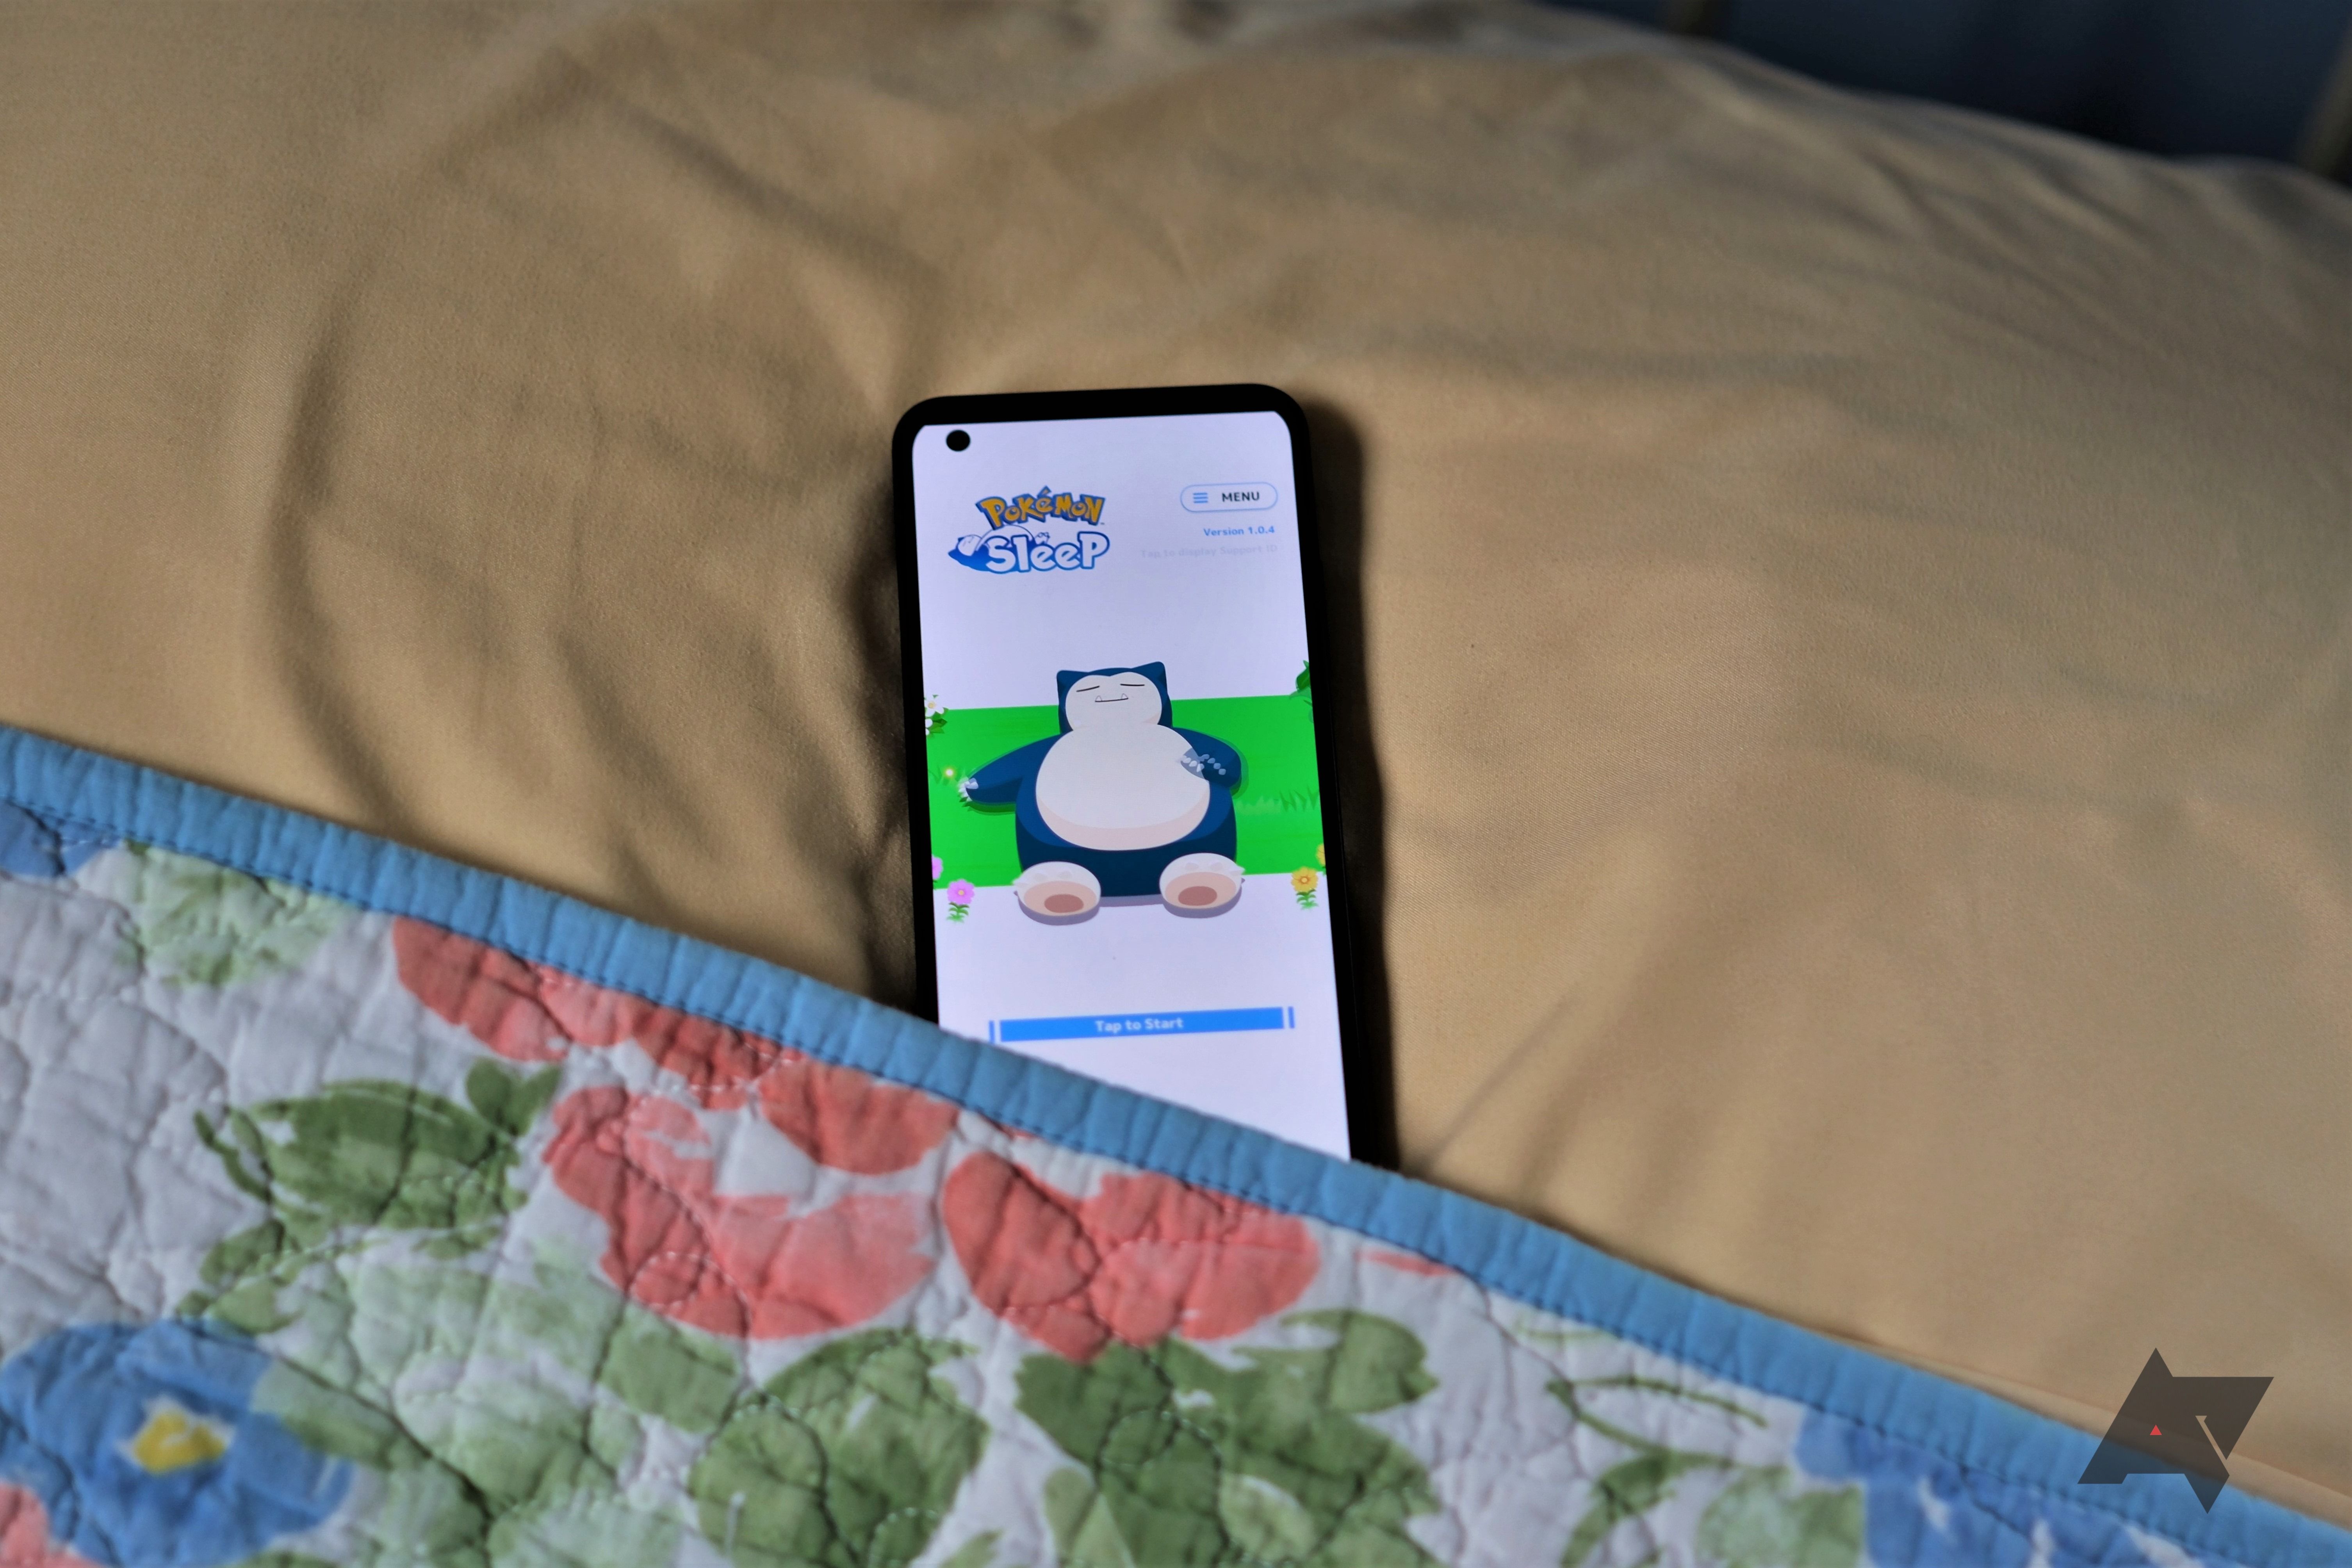 Pokémon Sleep on screen of phone laying in bed